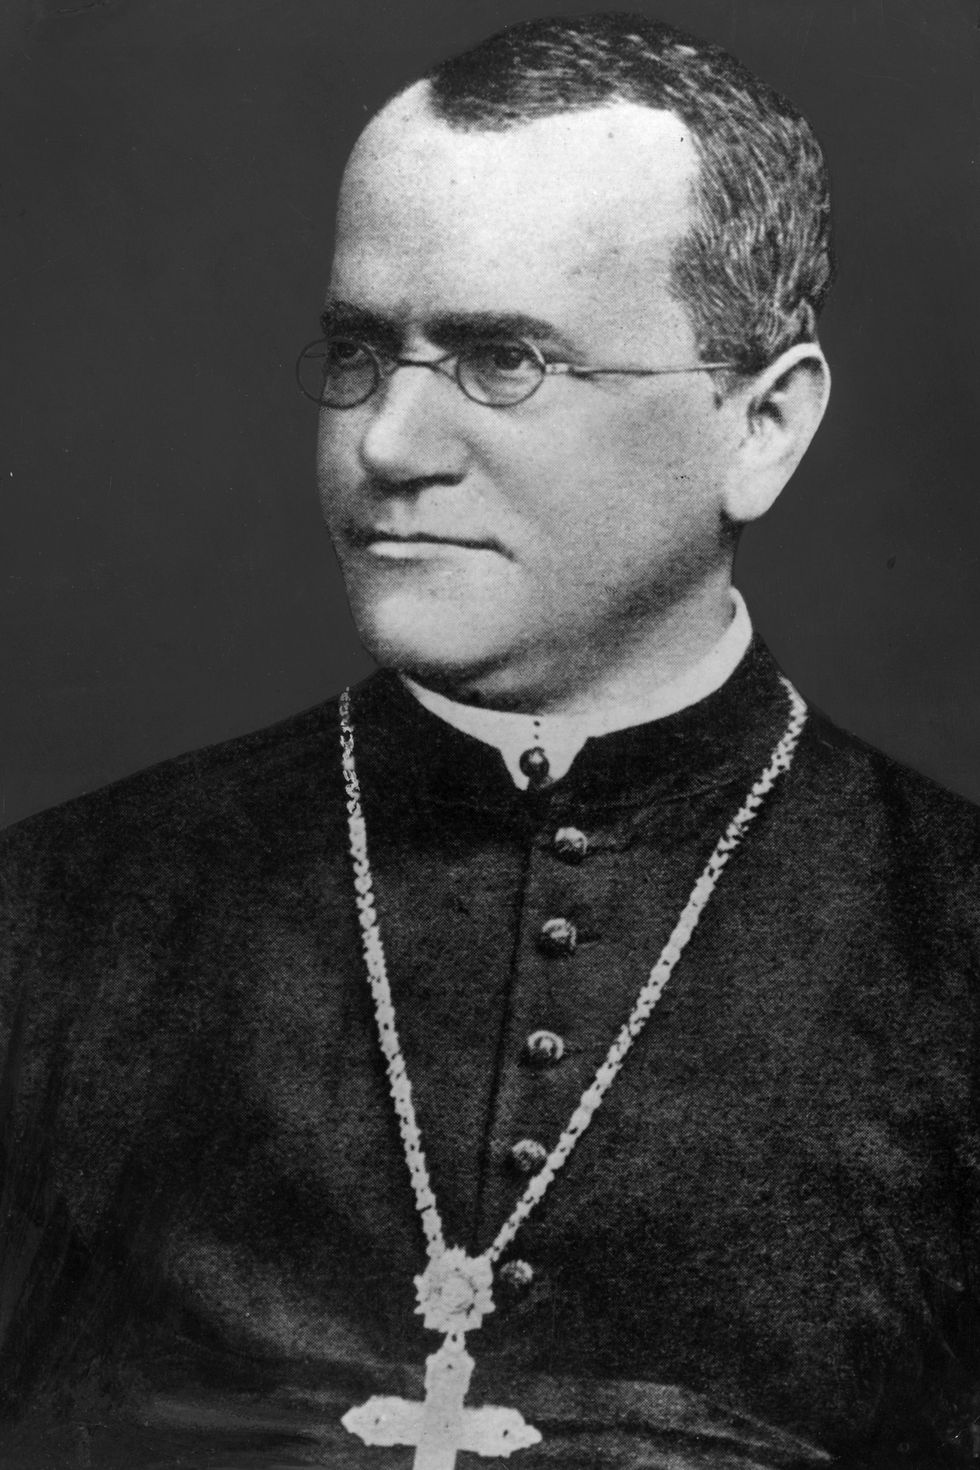 gregor mendel wearing a large cross pendant around his neck and looking to the right in a portrait photo